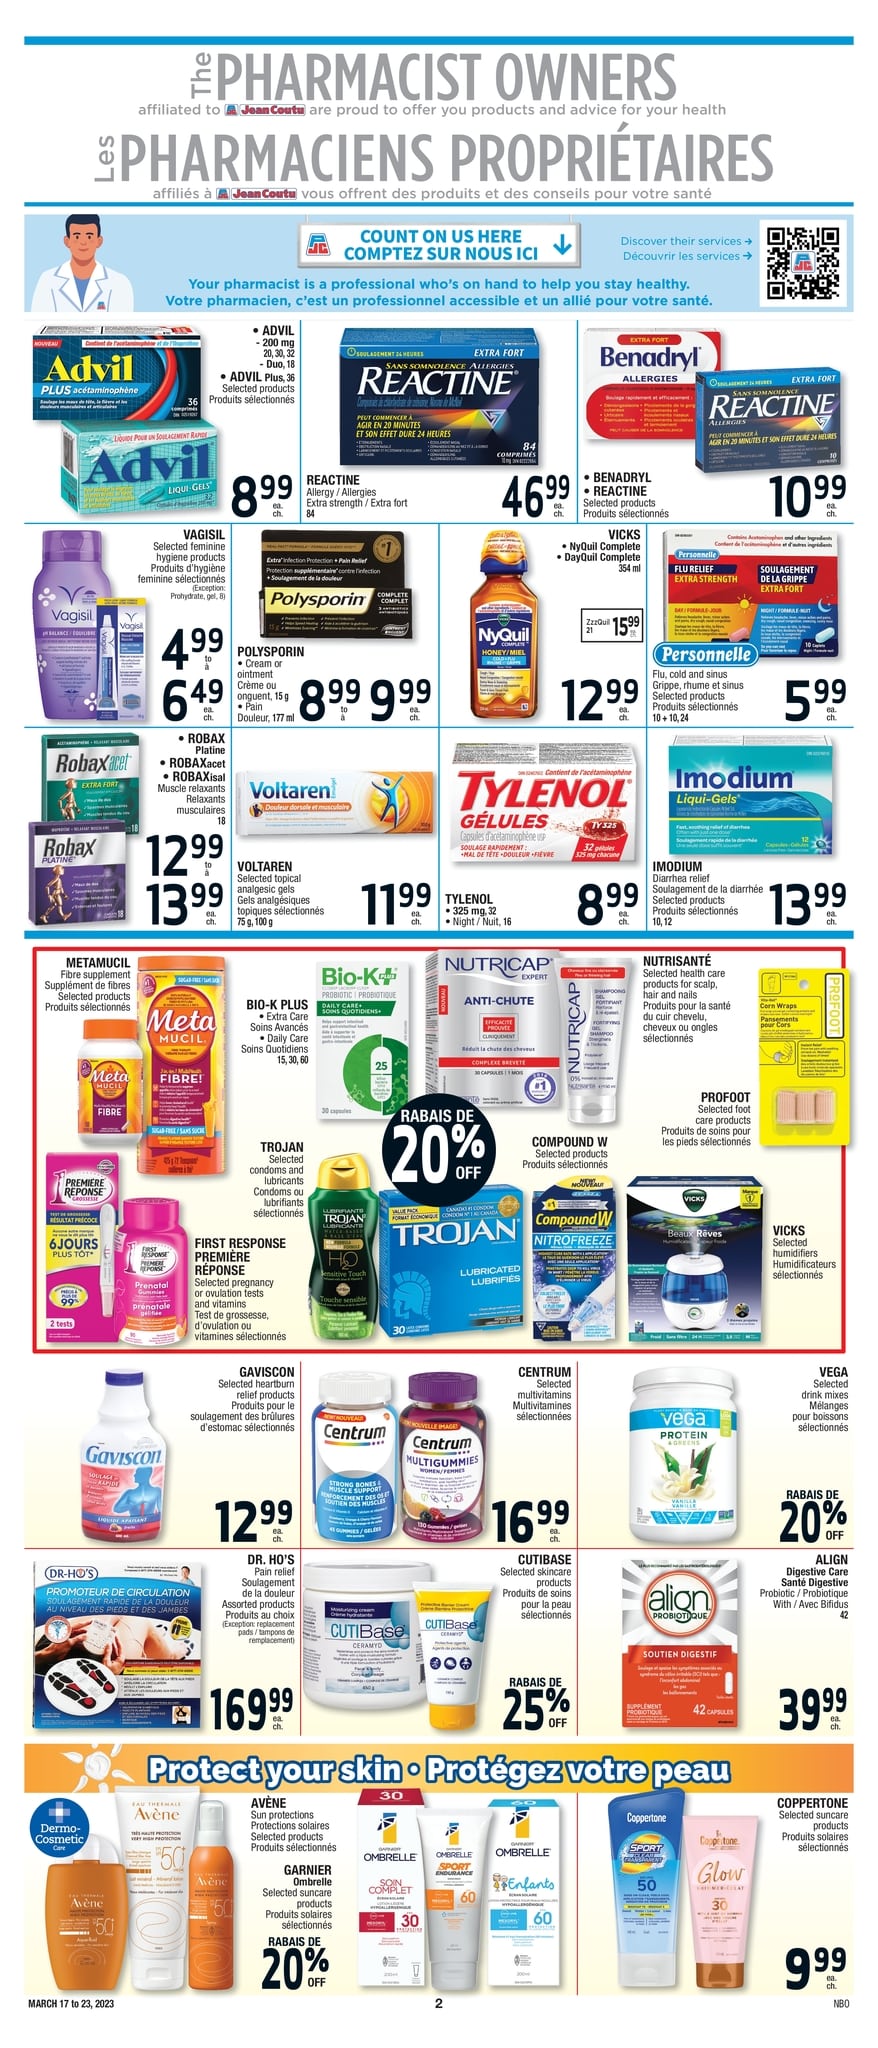 Jean Coutu - Weekly Flyer Specials - Page 3